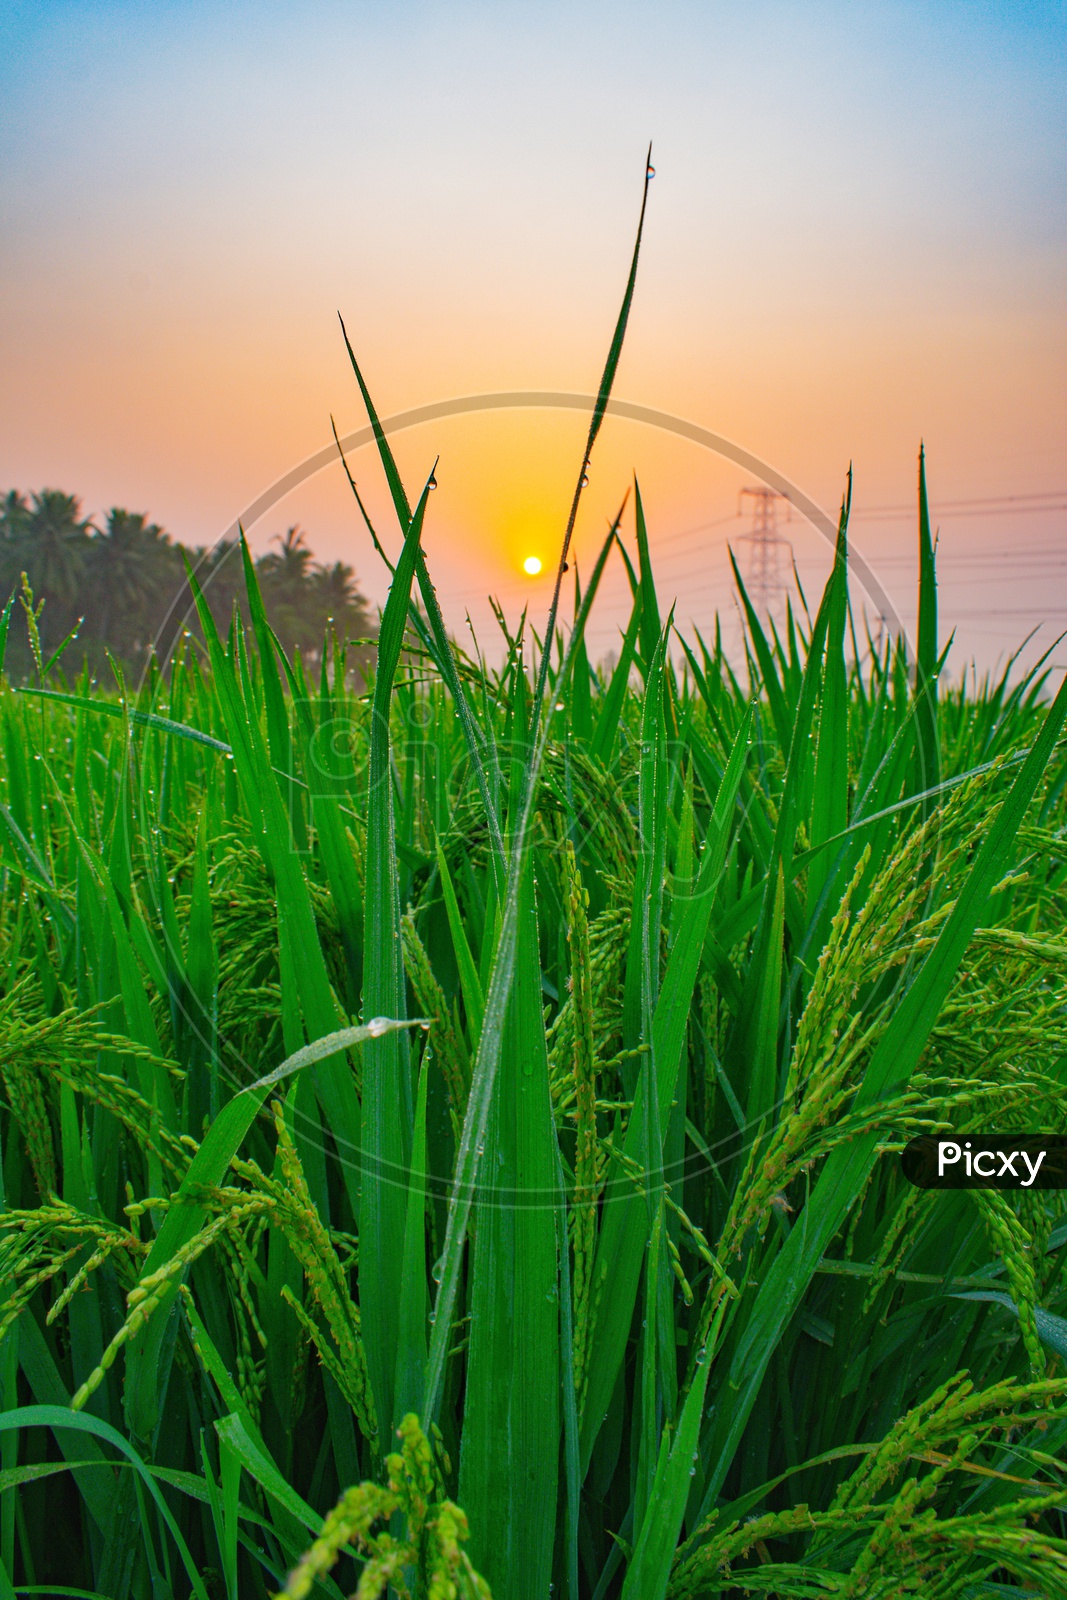 The beautiful view of paddy crop through sunrise